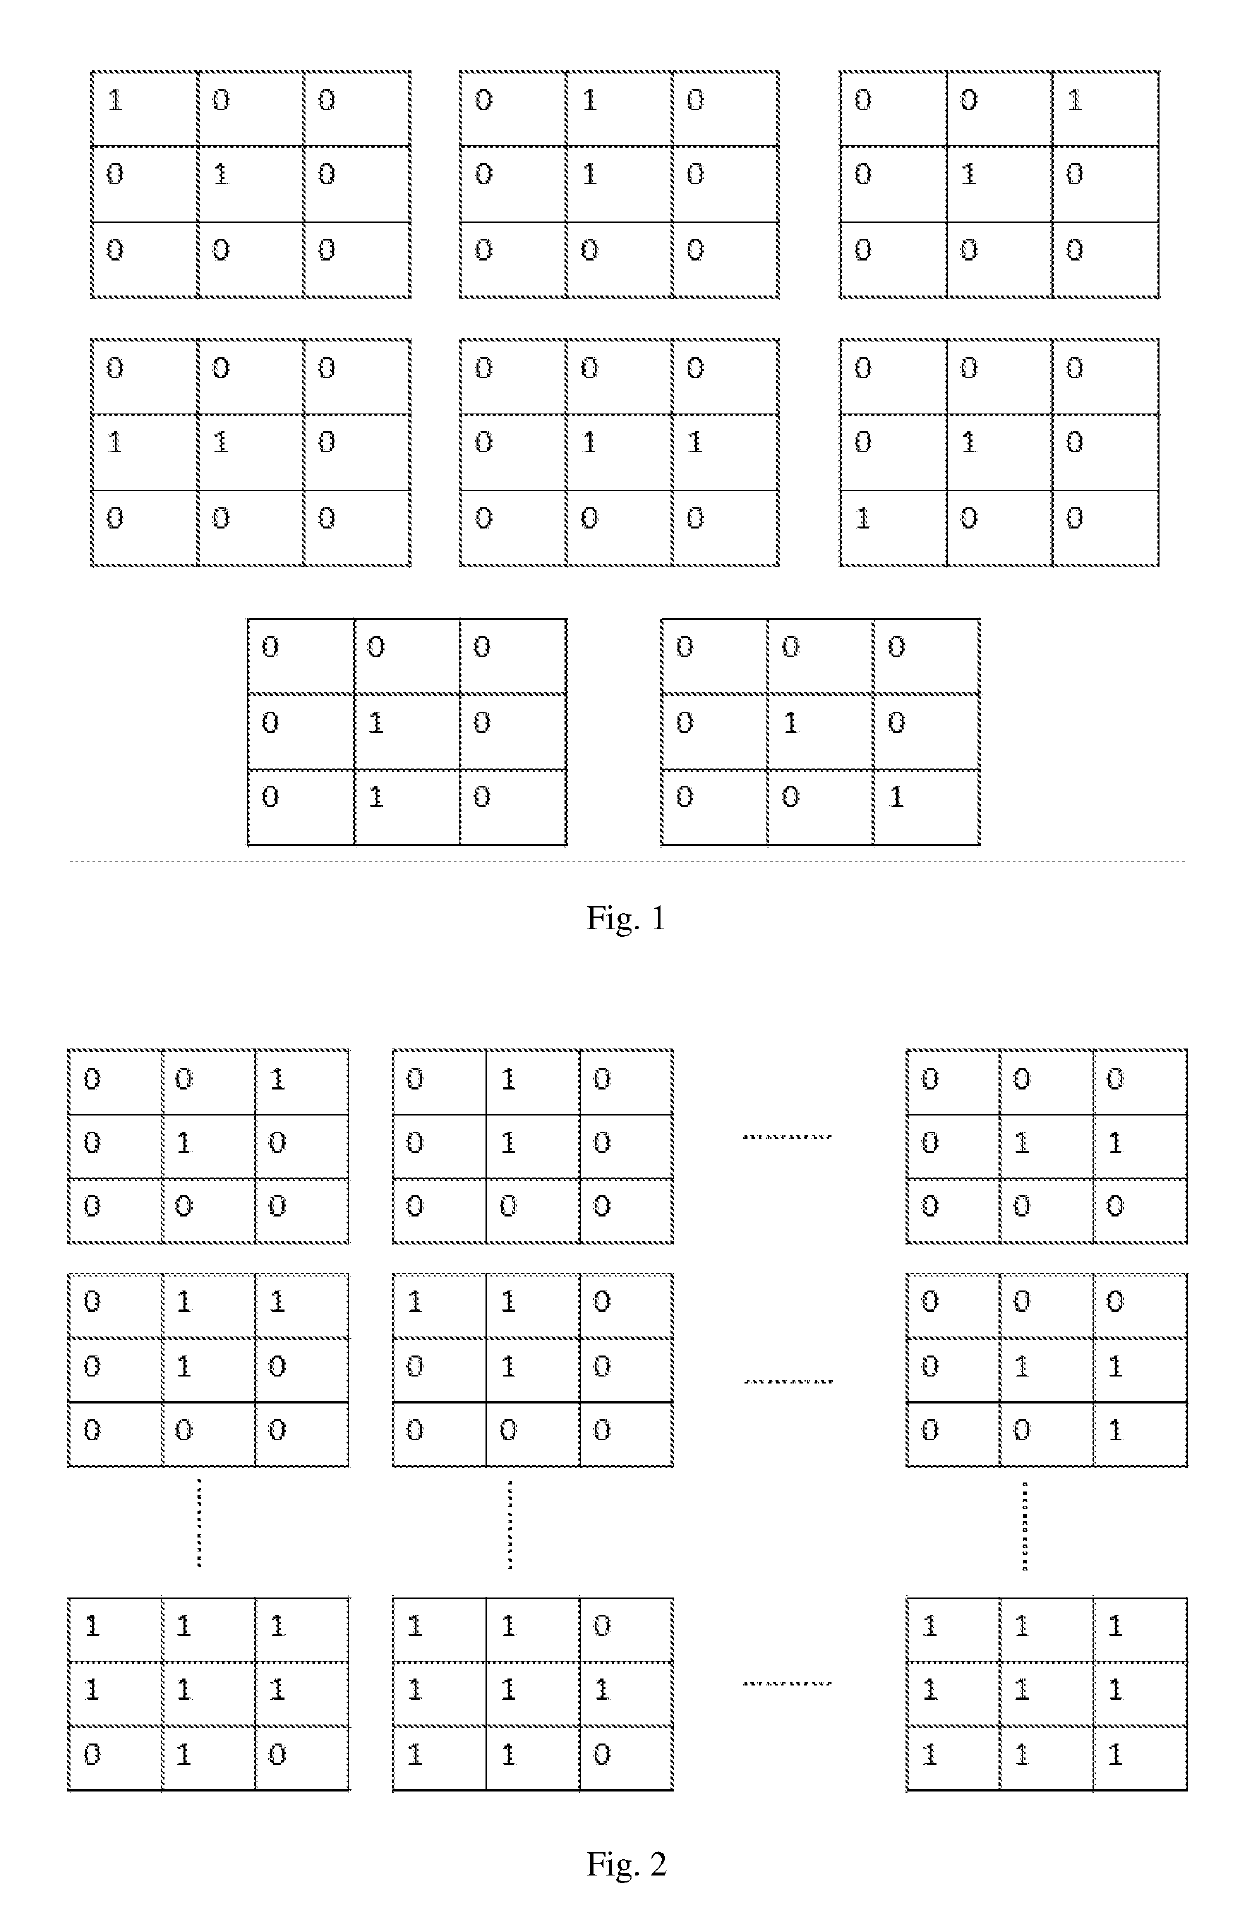 Local connectivity feature transform of binary images containing text characters for optical character/word recognition